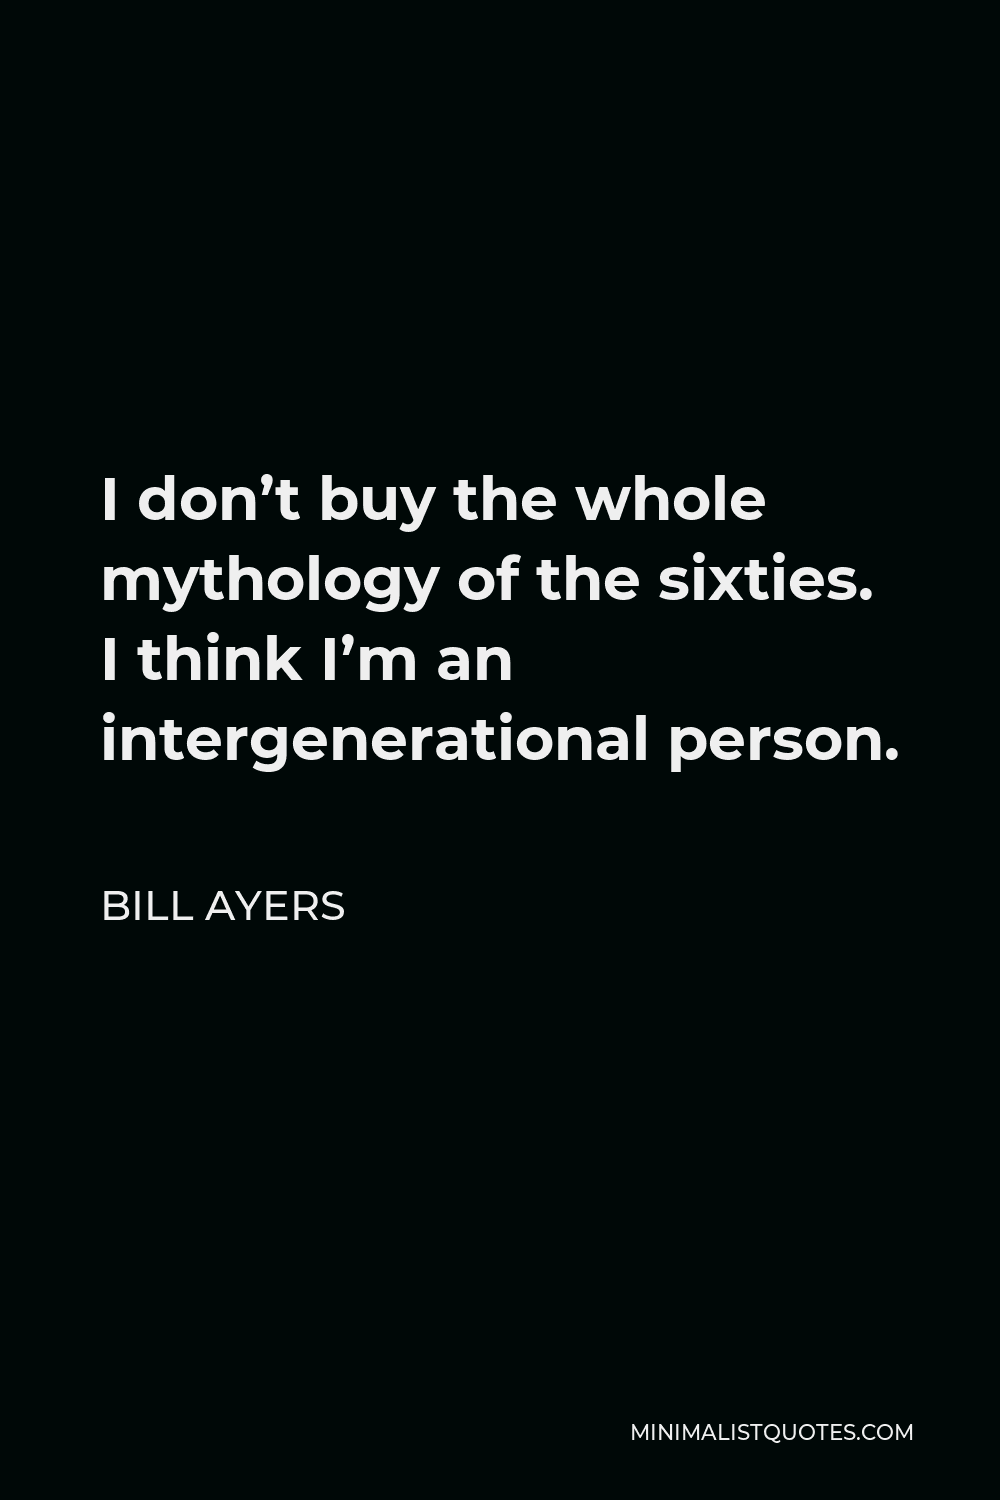 Bill Ayers Quote - I don’t buy the whole mythology of the sixties. I think I’m an intergenerational person.